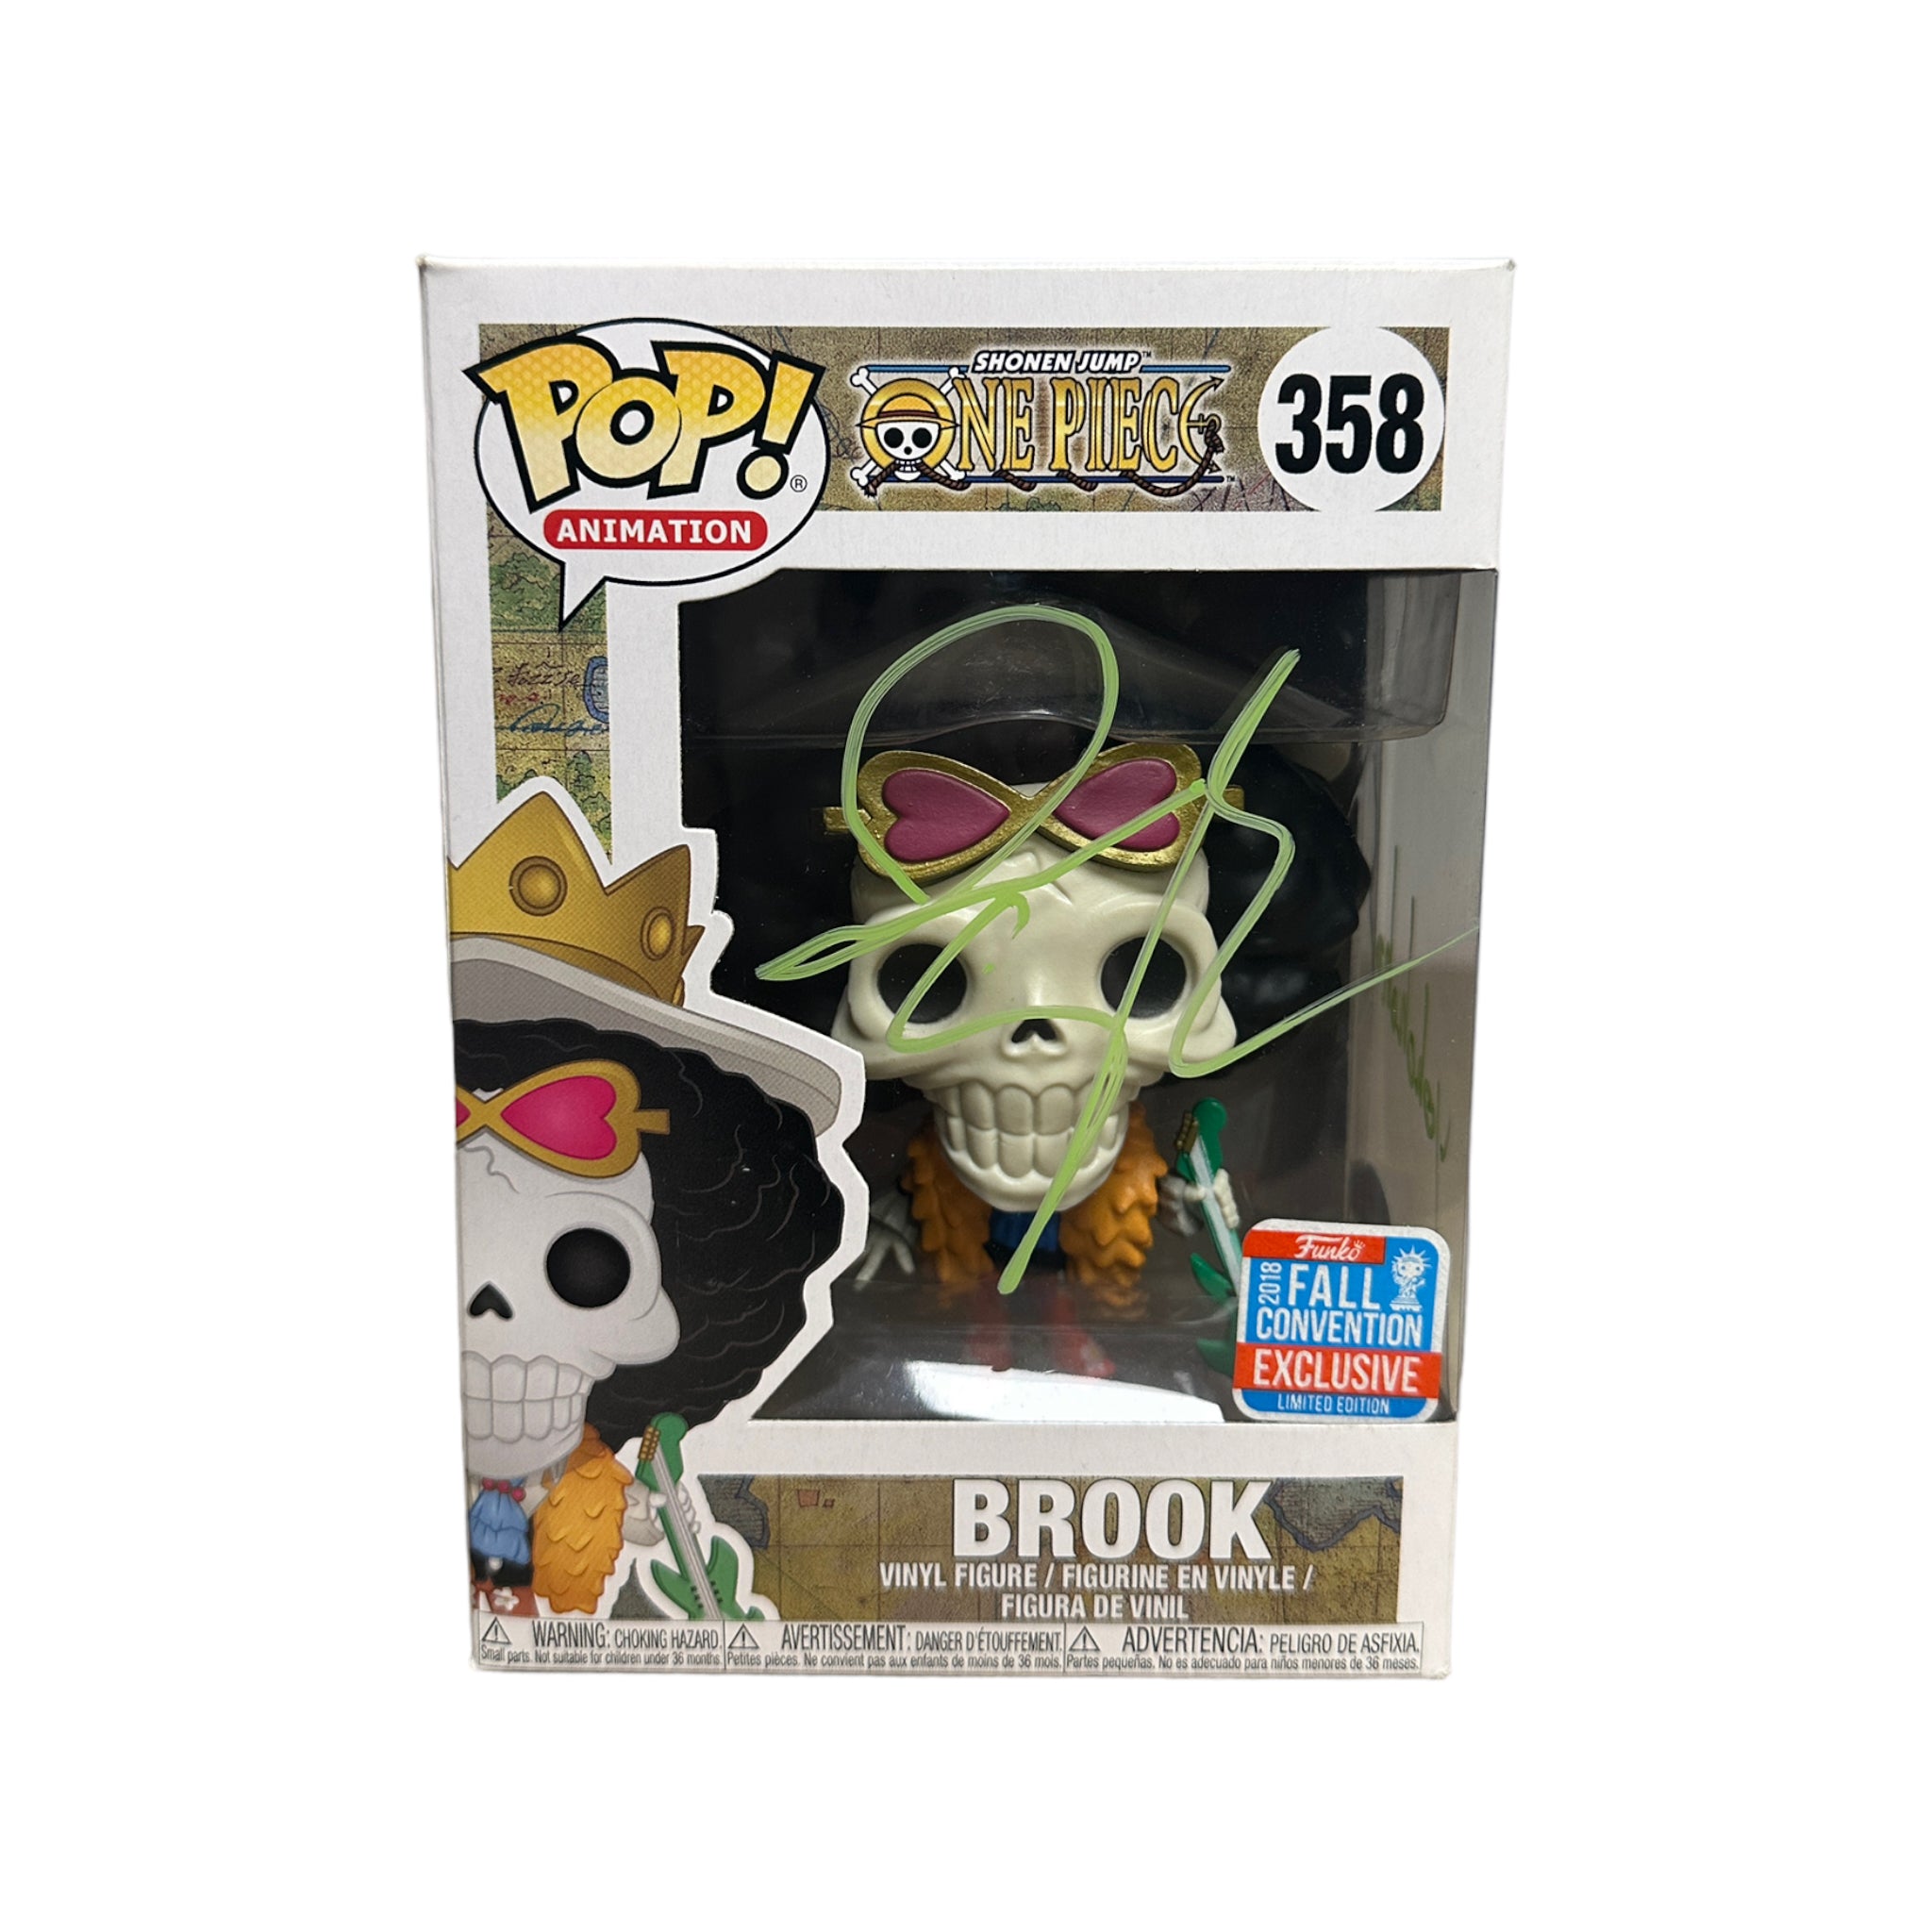 Ian Sinclair Signed Brook #358 Funko Pop! - One Piece - NYCC 2018 Shared Exclusive - Condition 8/10 - JSA Authenticated